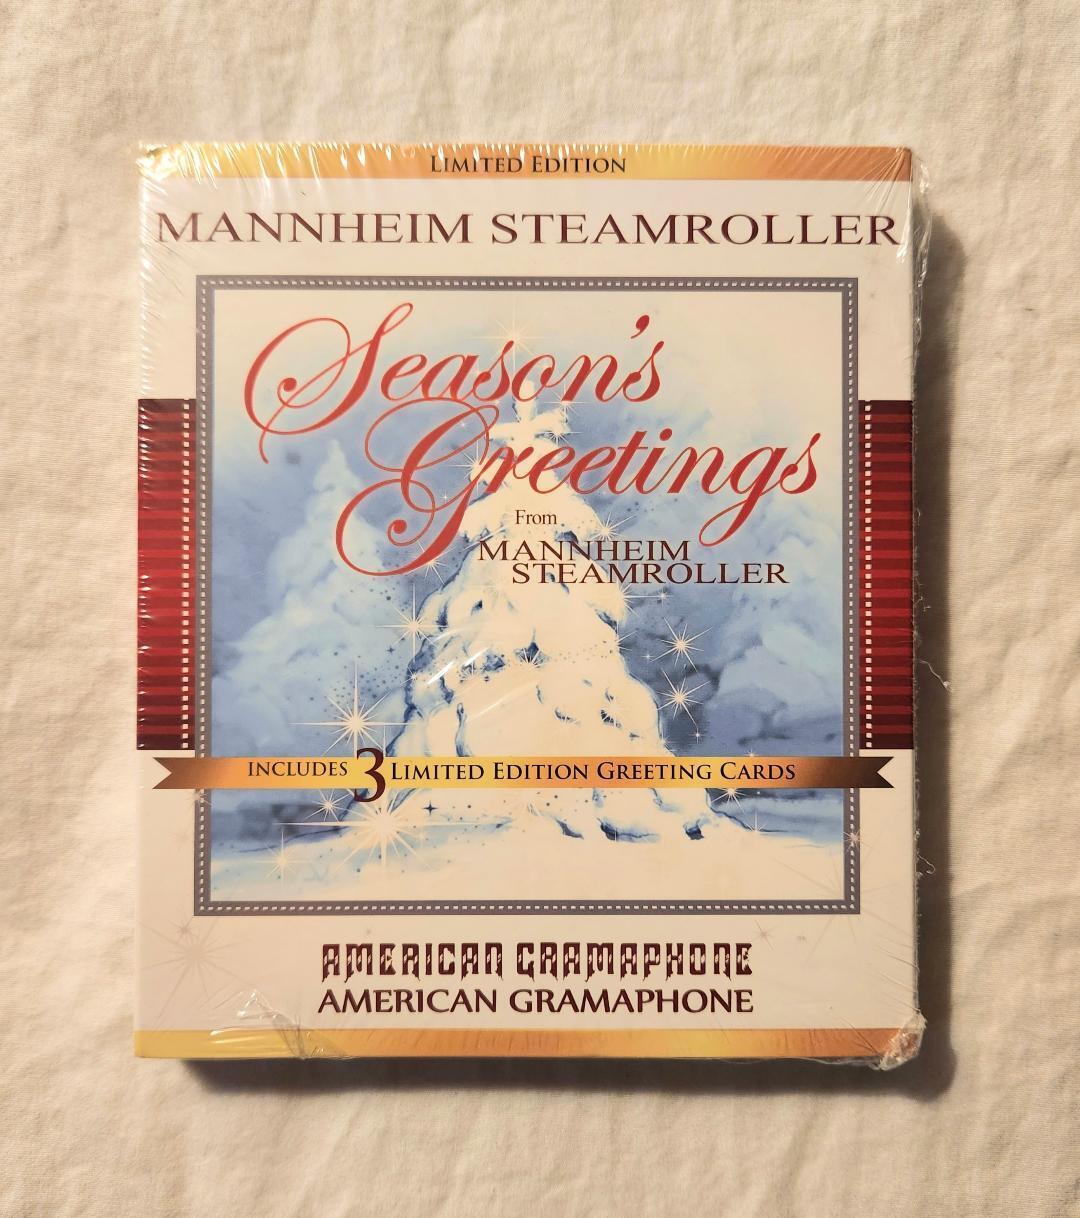 Season's Greetings from Mannheim Steamroller CD + Limited Edition Greeting Cards